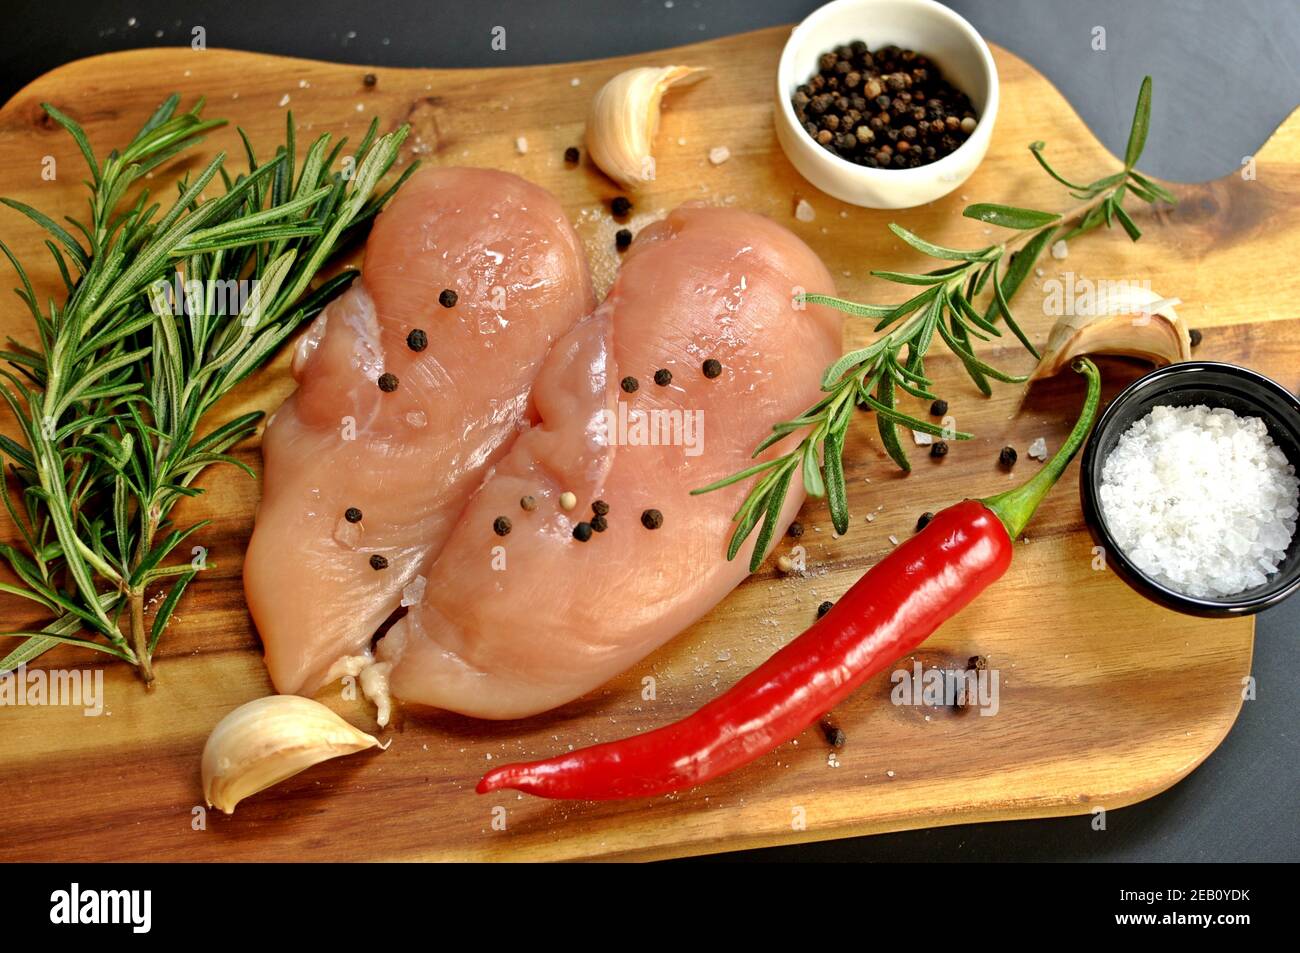 Raw fresh uncooked chicken breast meat fillet dish with rosemary, pepper, salt, red chilly pepper and garlic on wooden board and black background. Stock Photo